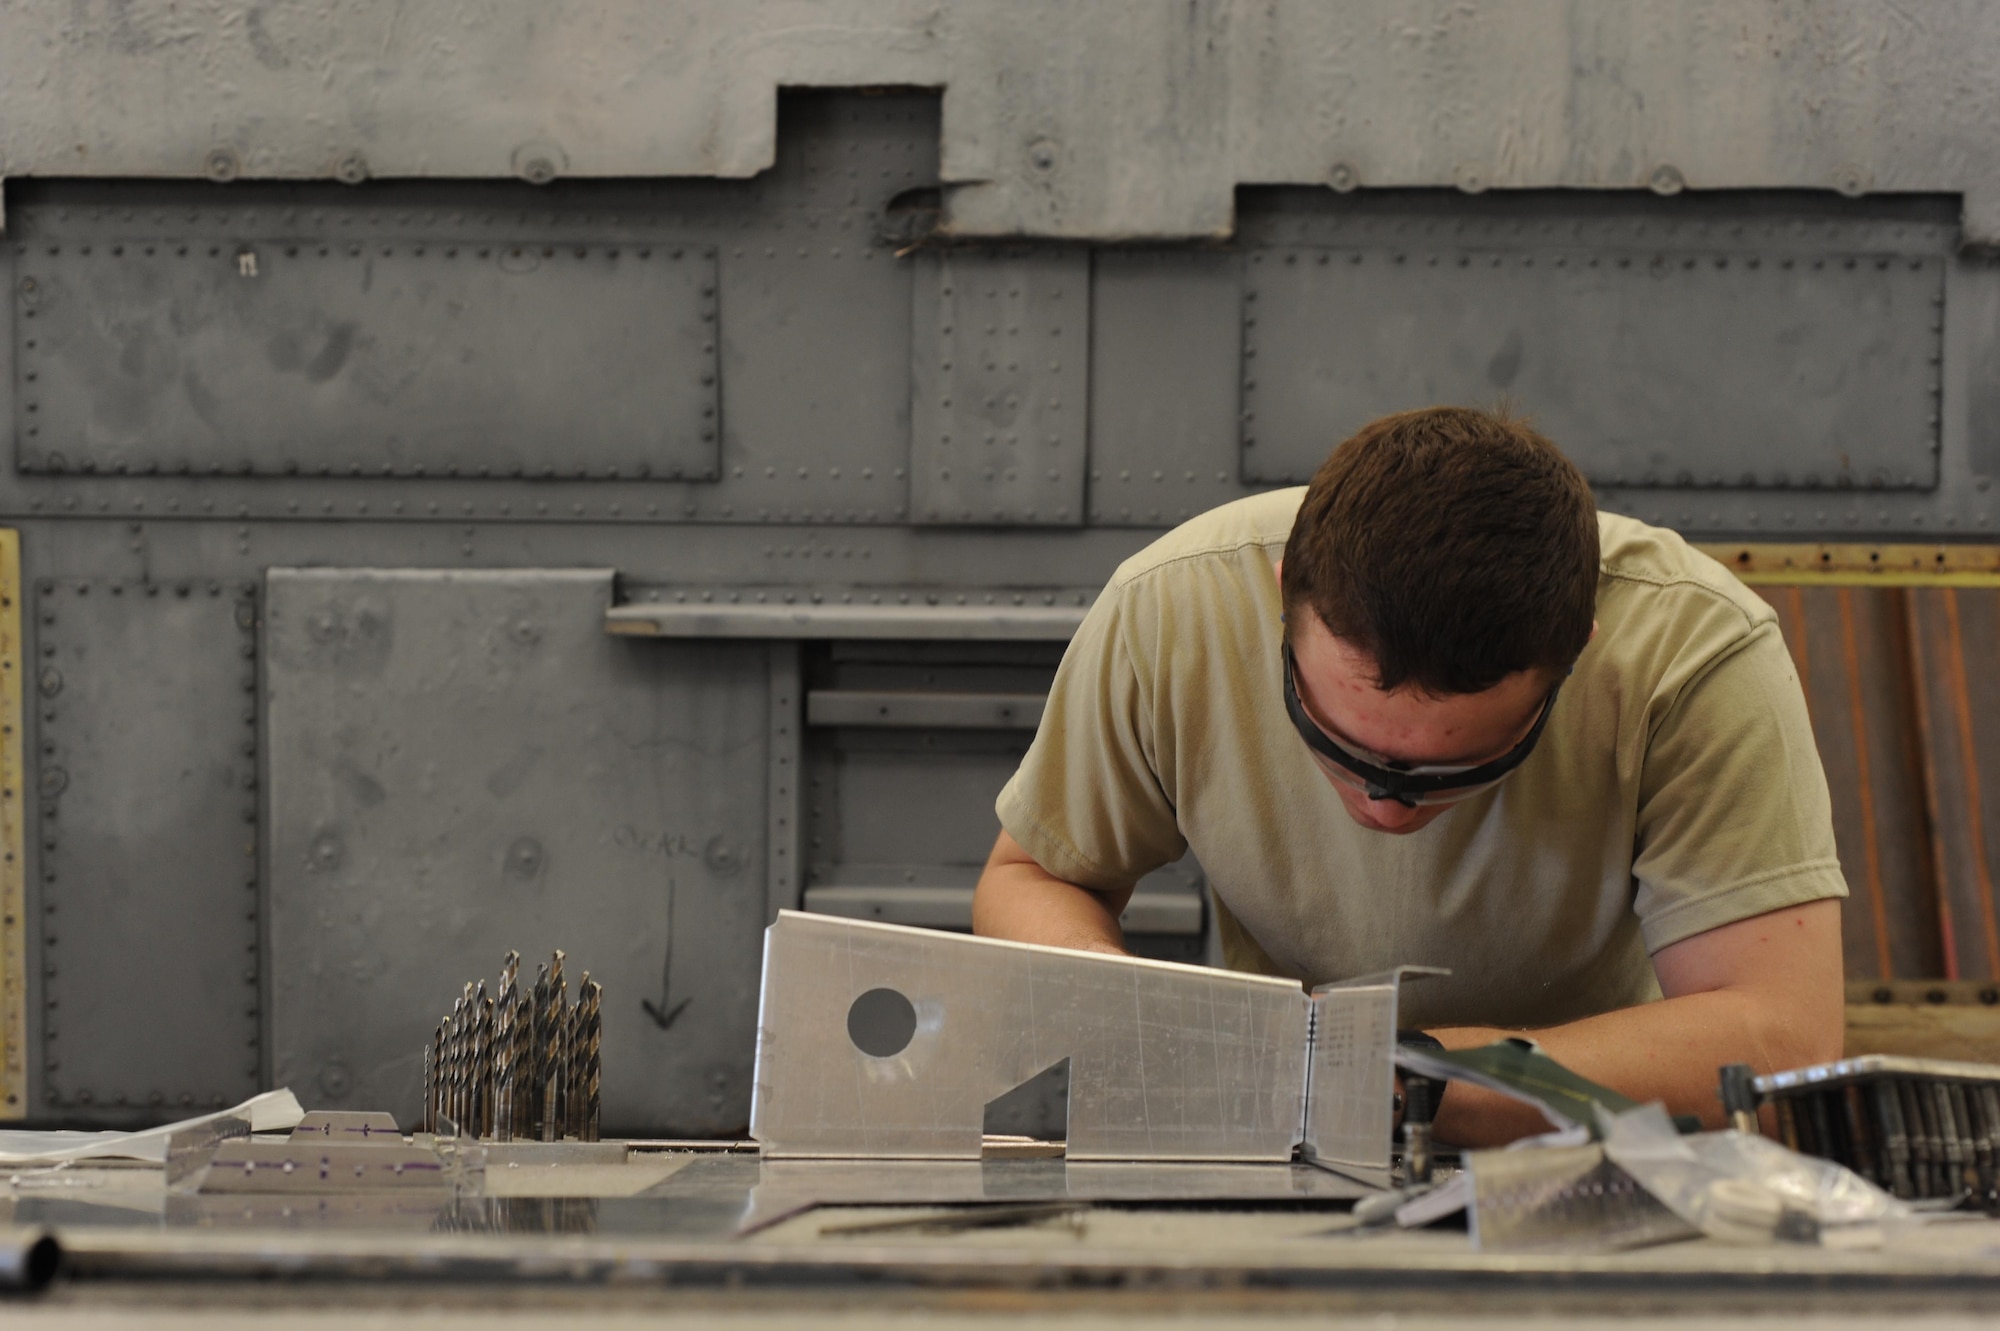 U.S. Air Force Airman 1st Class Jordan Collins, 7th Equipment Maintenance Squadron aircraft structural apprentice, checks the parts of a simulated air structure for correct placement July 7, 2016, at Dyess Air Force Base, Texas. The SAS is an in-depth training project that gives new Airmen the opportunity to practice a variety of techniques, such as identifying materials, drilling, making measurements and correctly forming metal pieces for complex aircraft repairs. (U.S. Air Force photo by Airman 1st Class Rebecca Van Syoc)